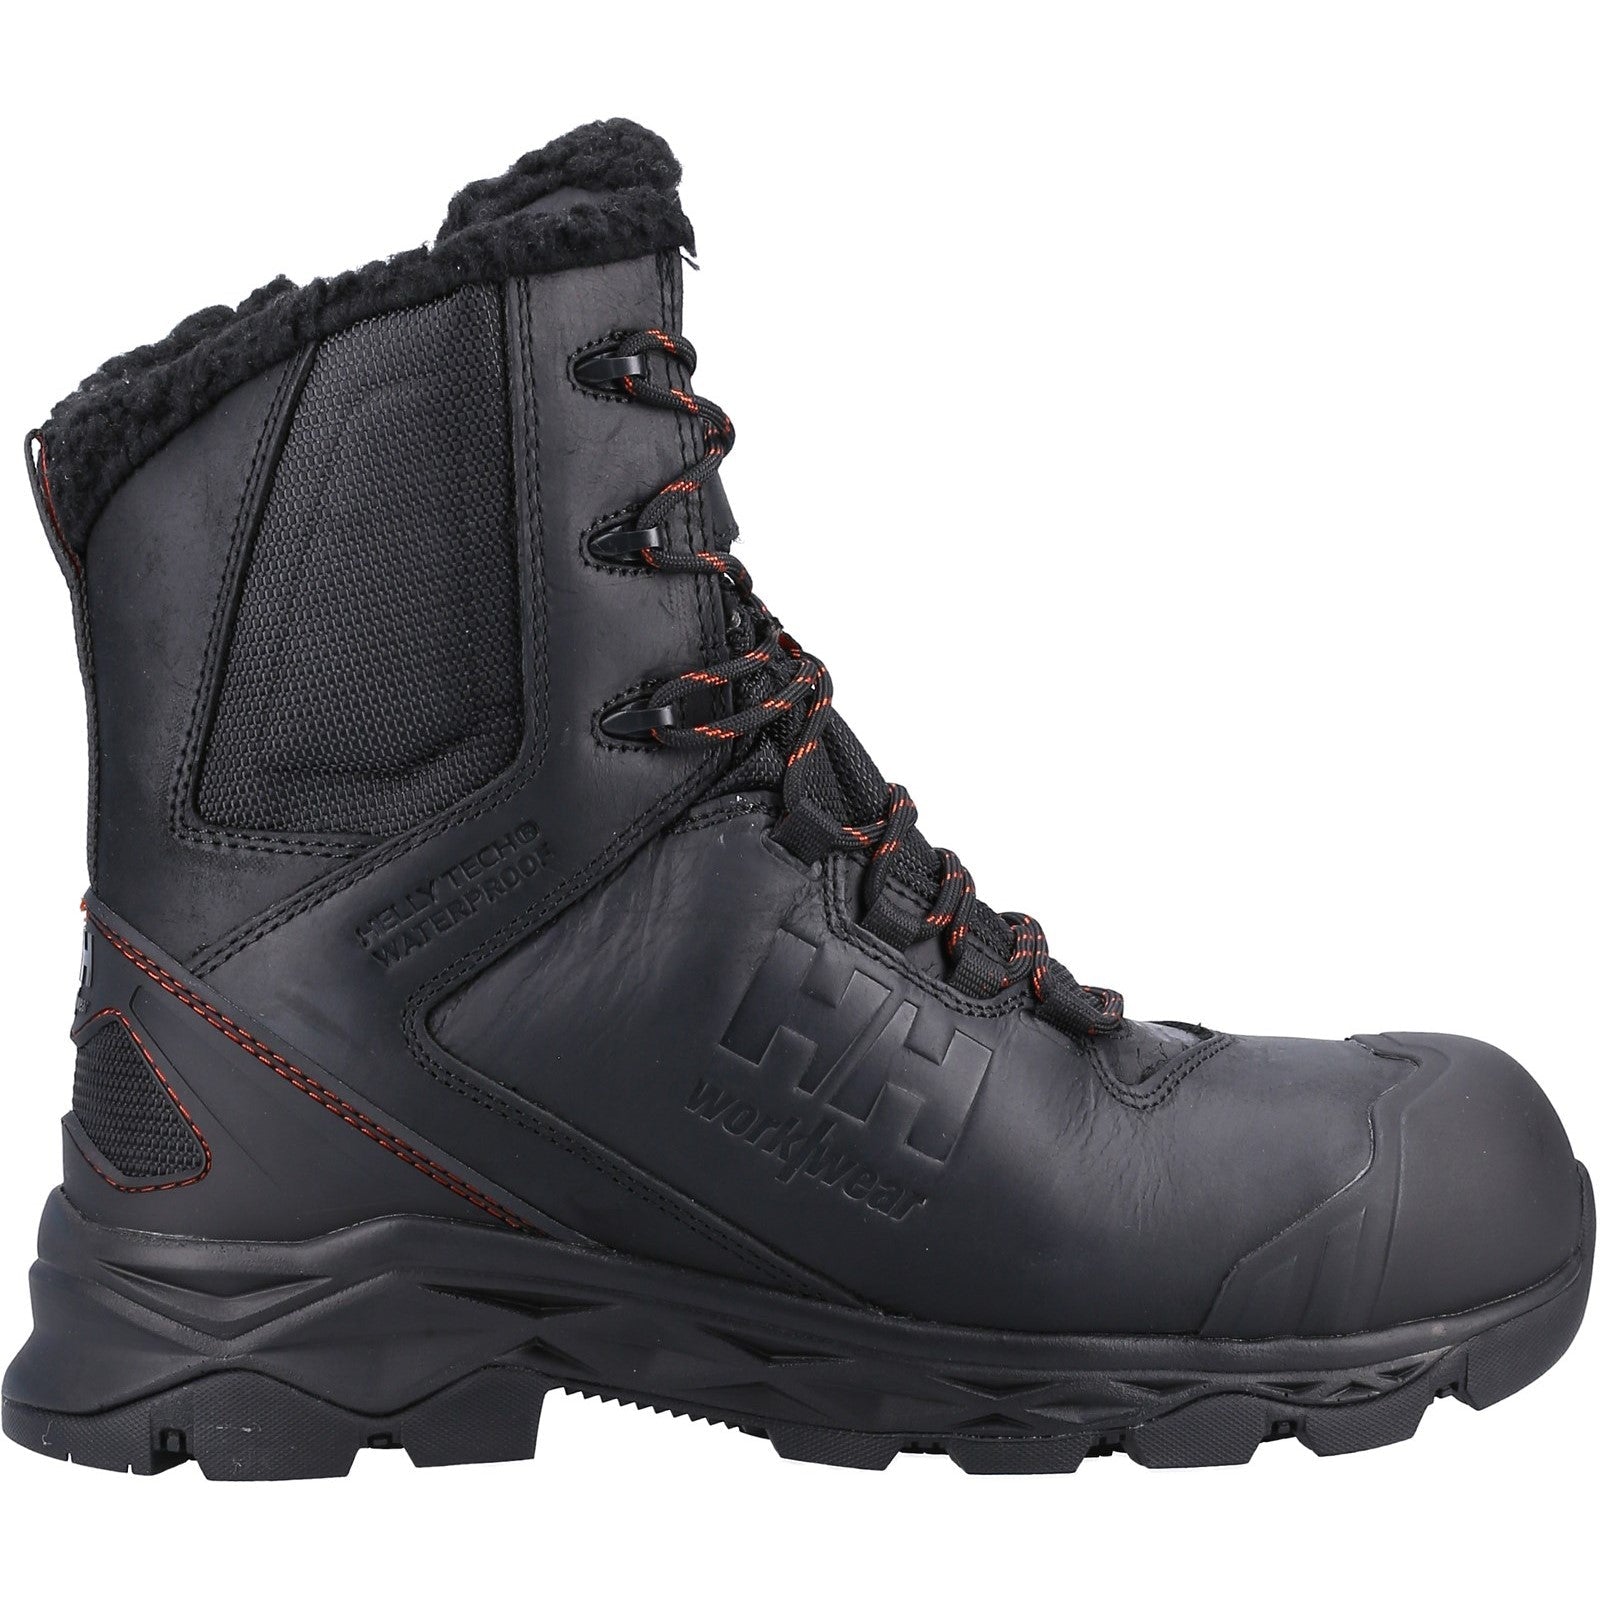 Helly Hansen Oxford Winter Tall Side Zip S3 Safety Boot in Black